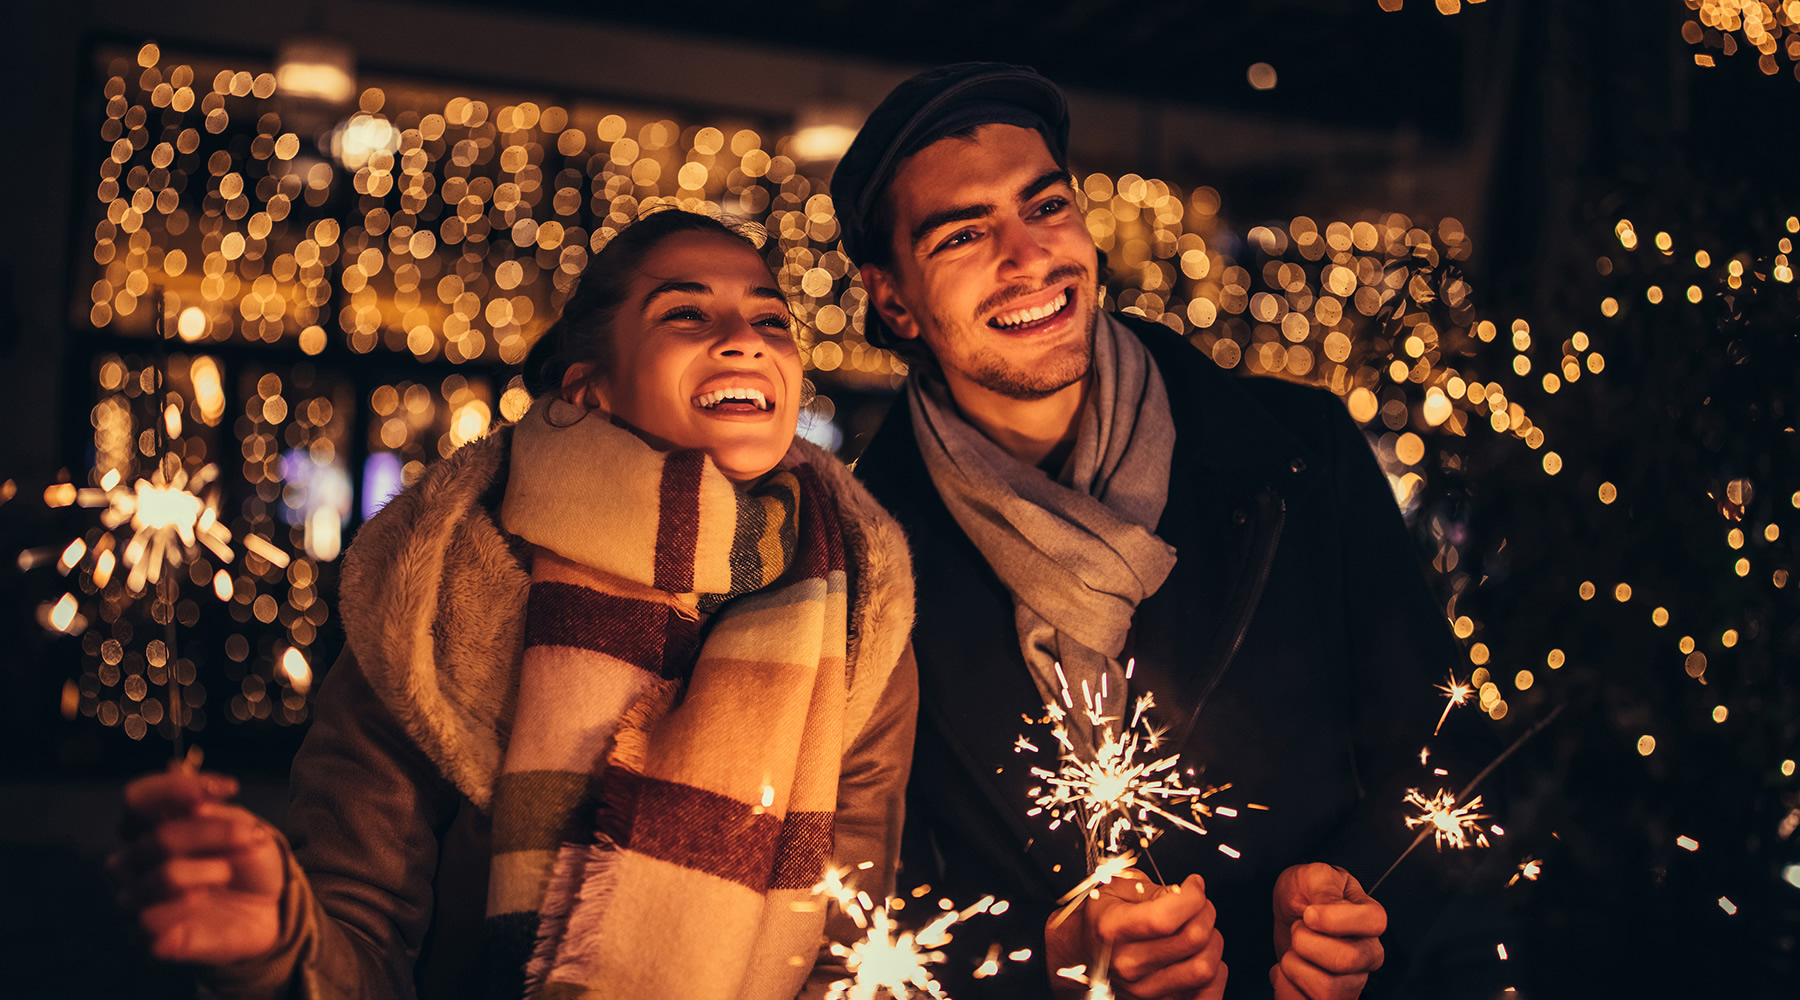 Smiling couple at nighttime dressed warmly holding sparklers with sparkling lights behind them